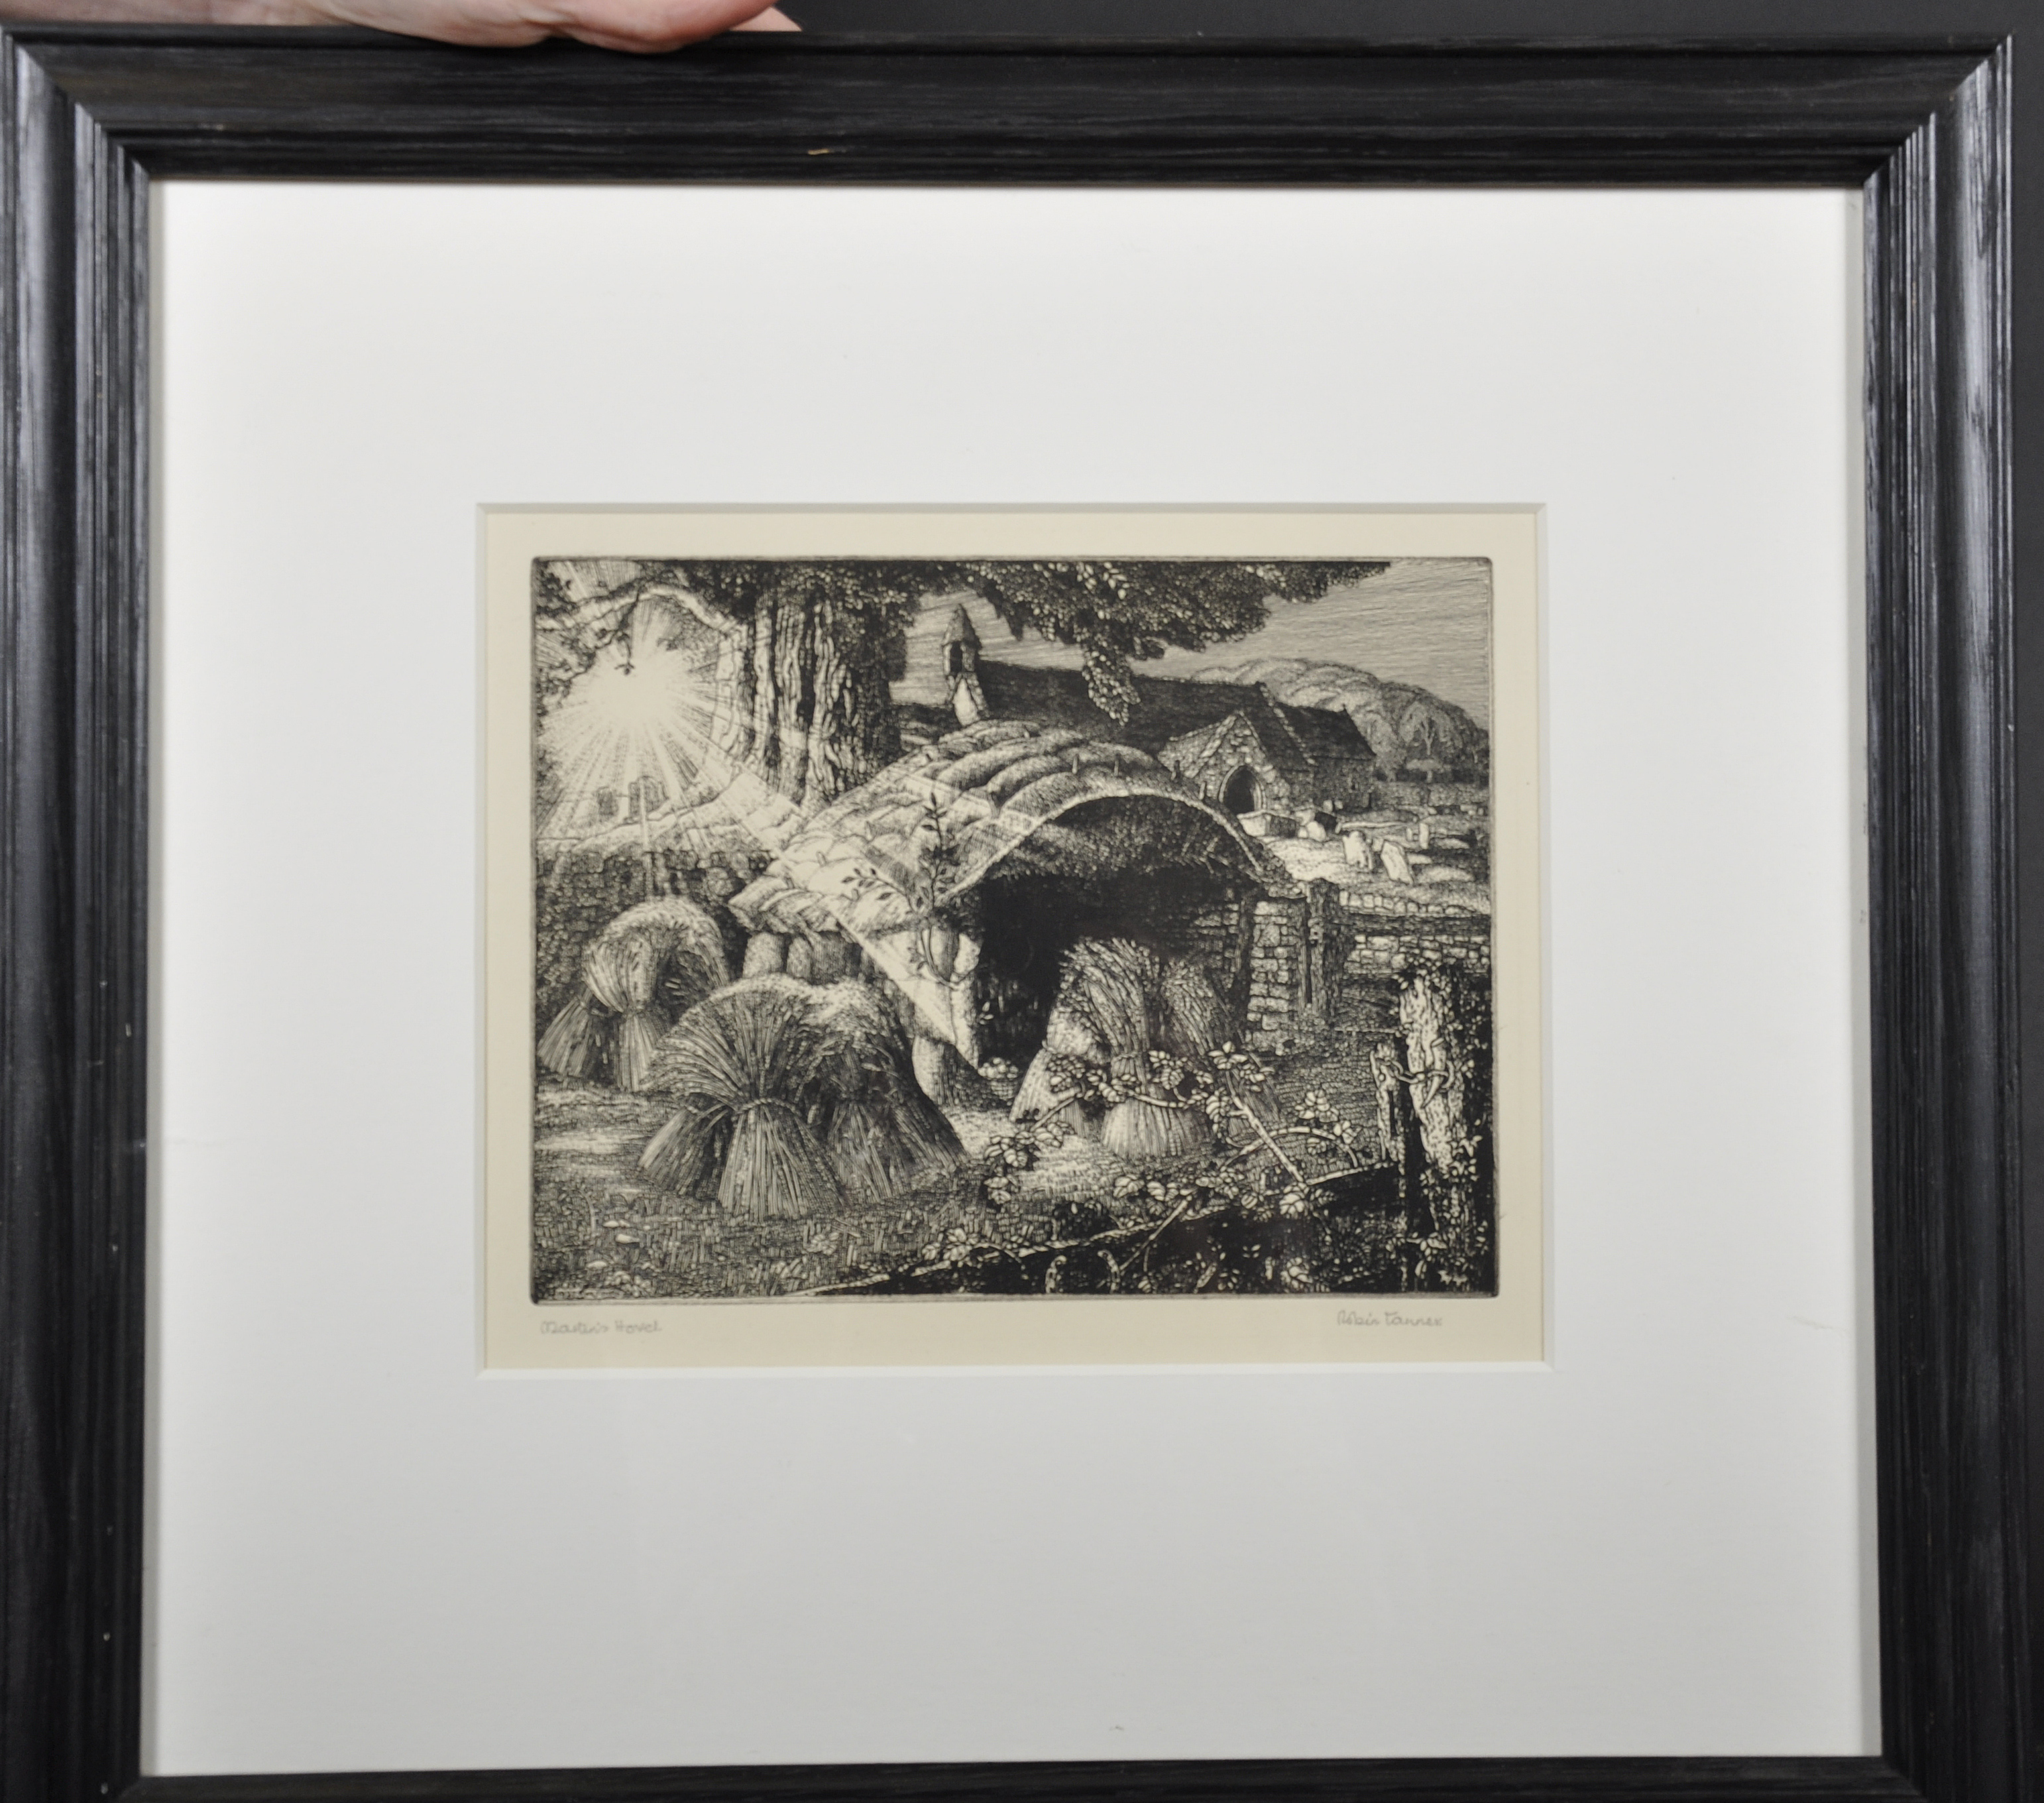 Robin Tanner (1904-1988) British. "Martin's Hovel", Etching Circa 1927, Signed and Inscribed in - Image 2 of 5